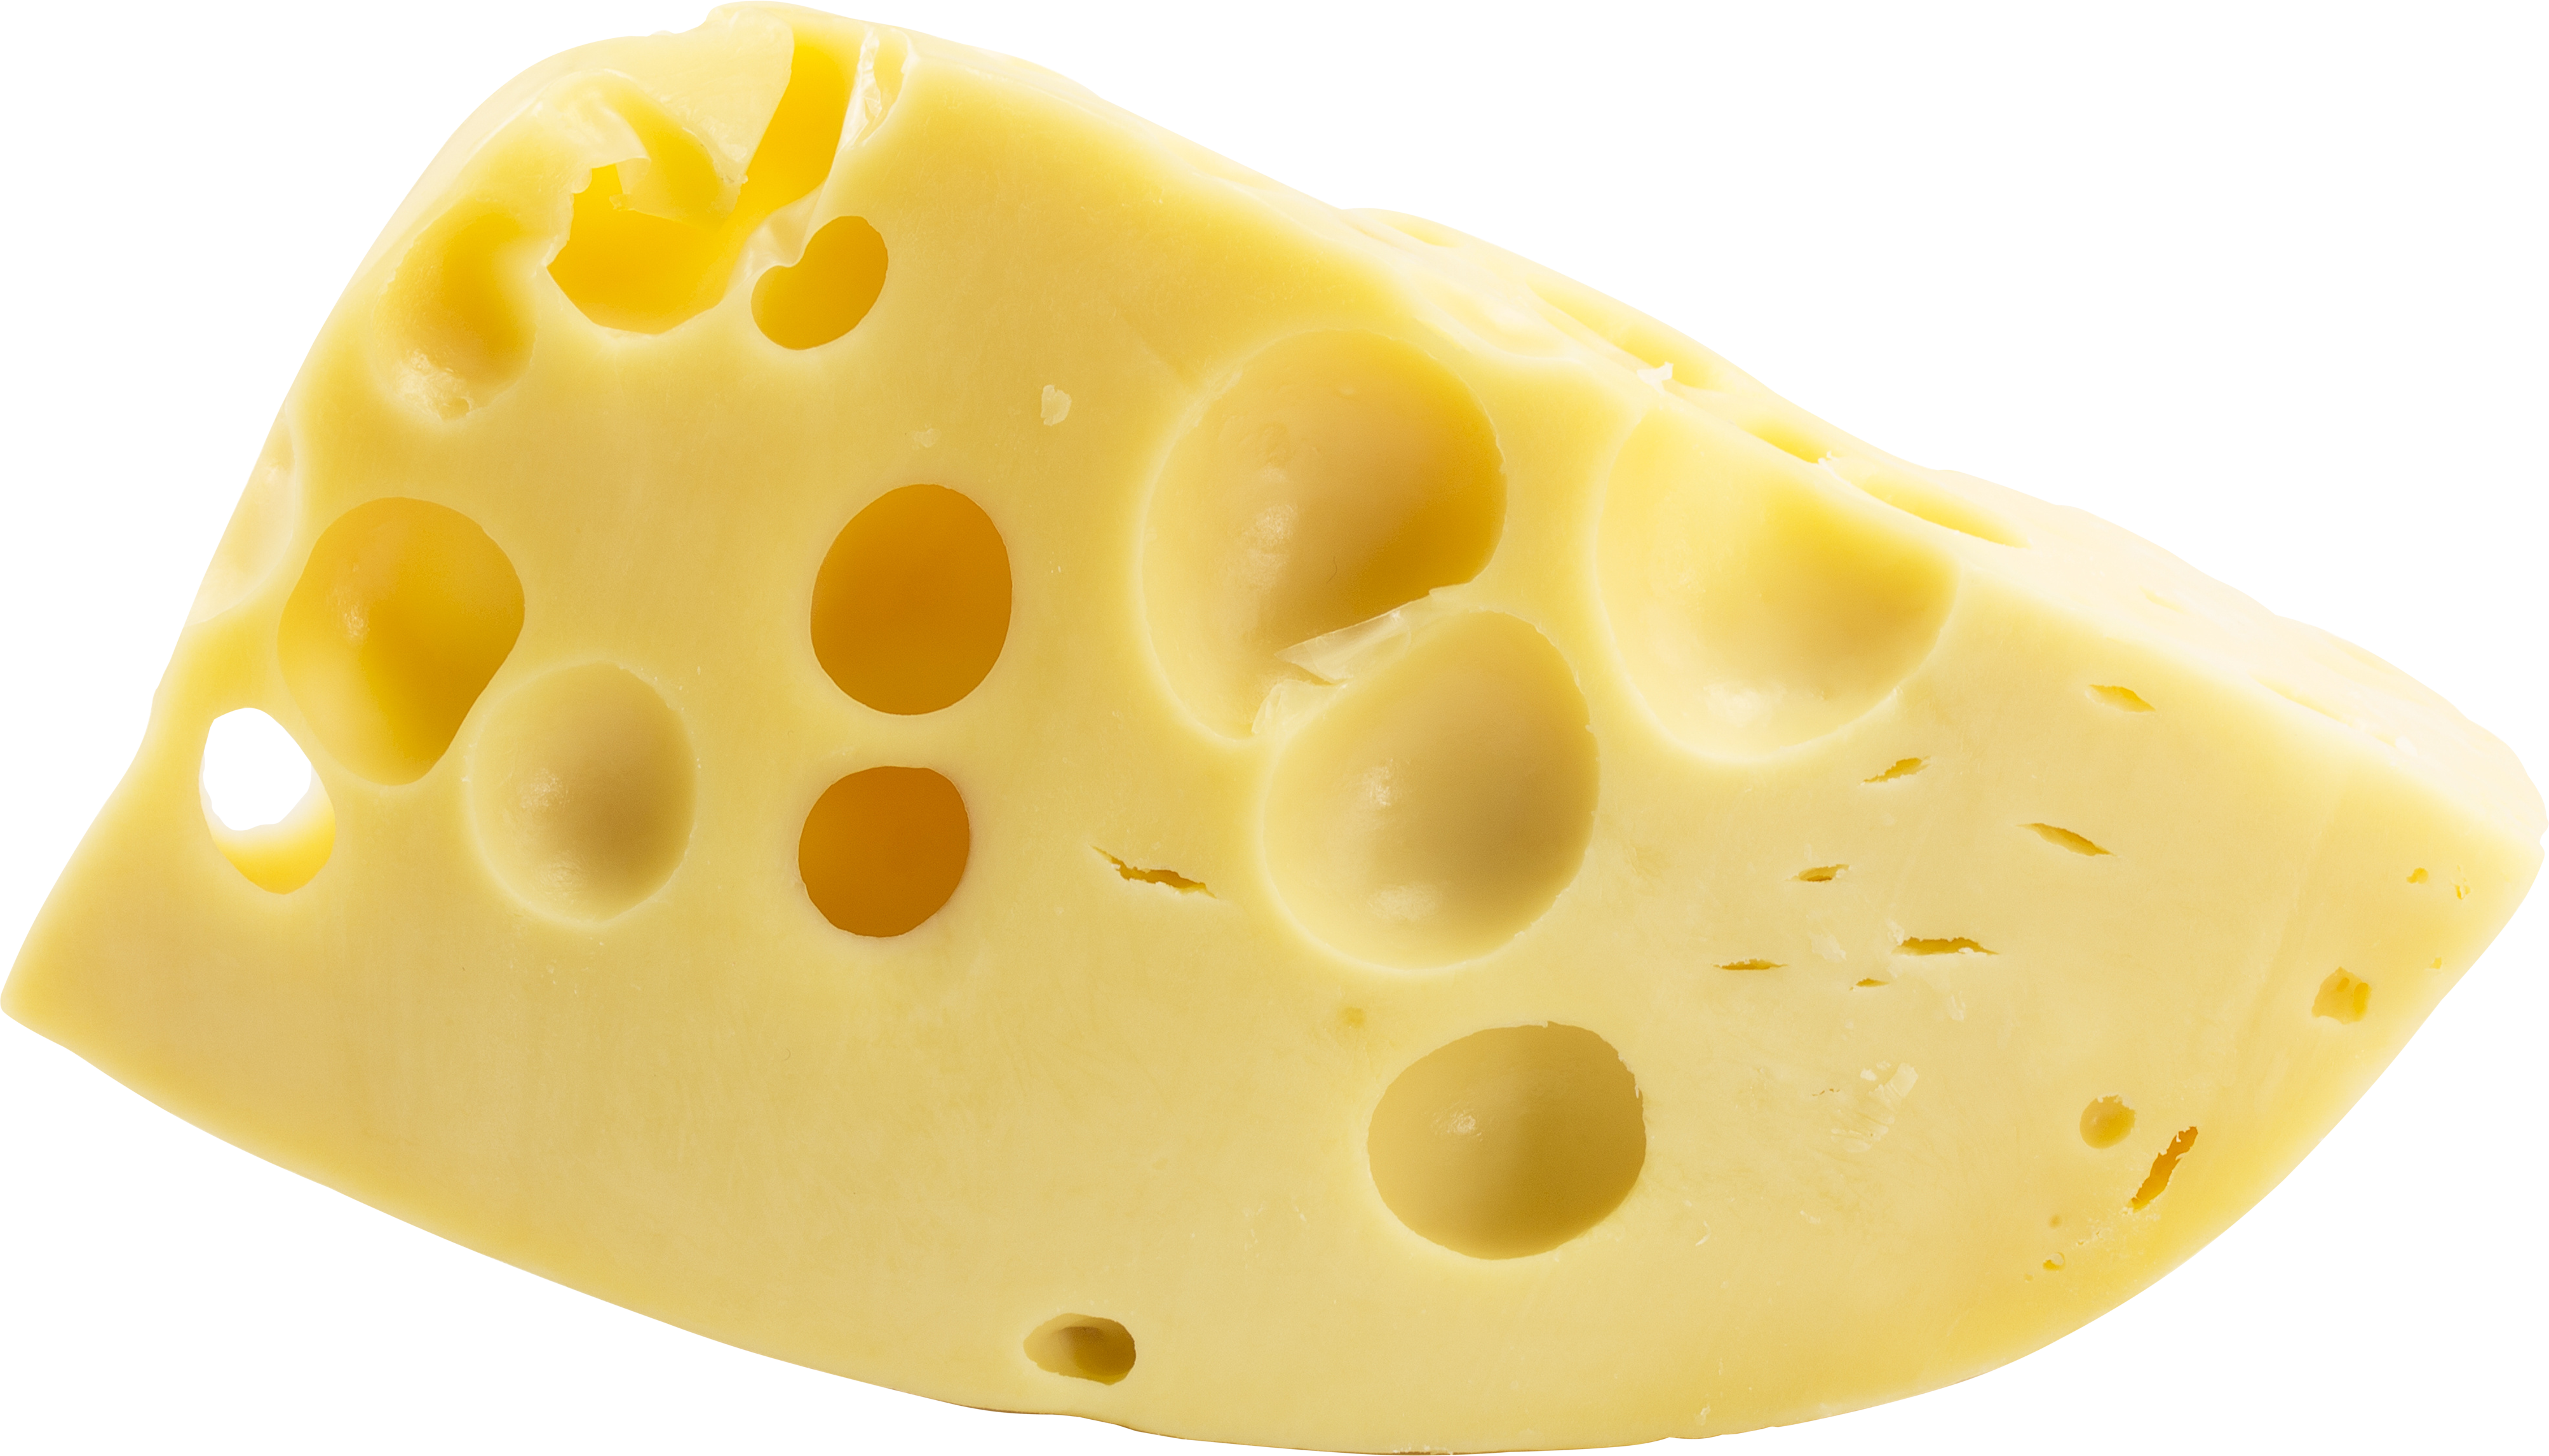 Cheese.png PlusPng.com 